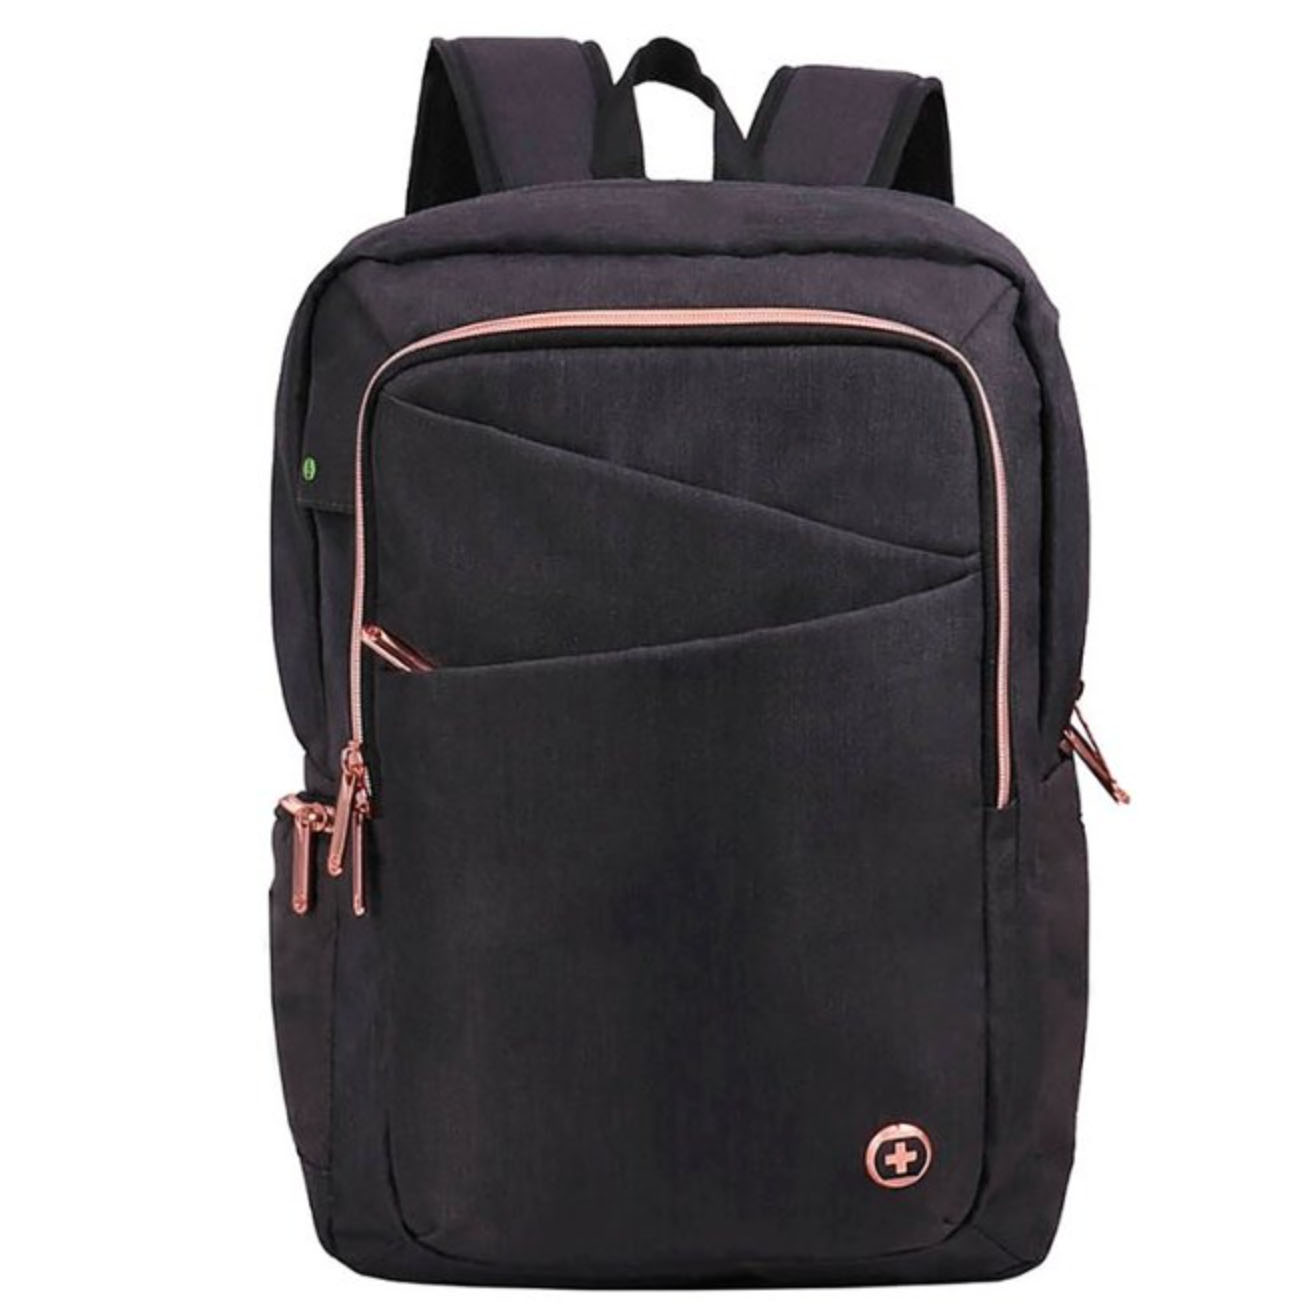 Black backpack with rose gold zipper